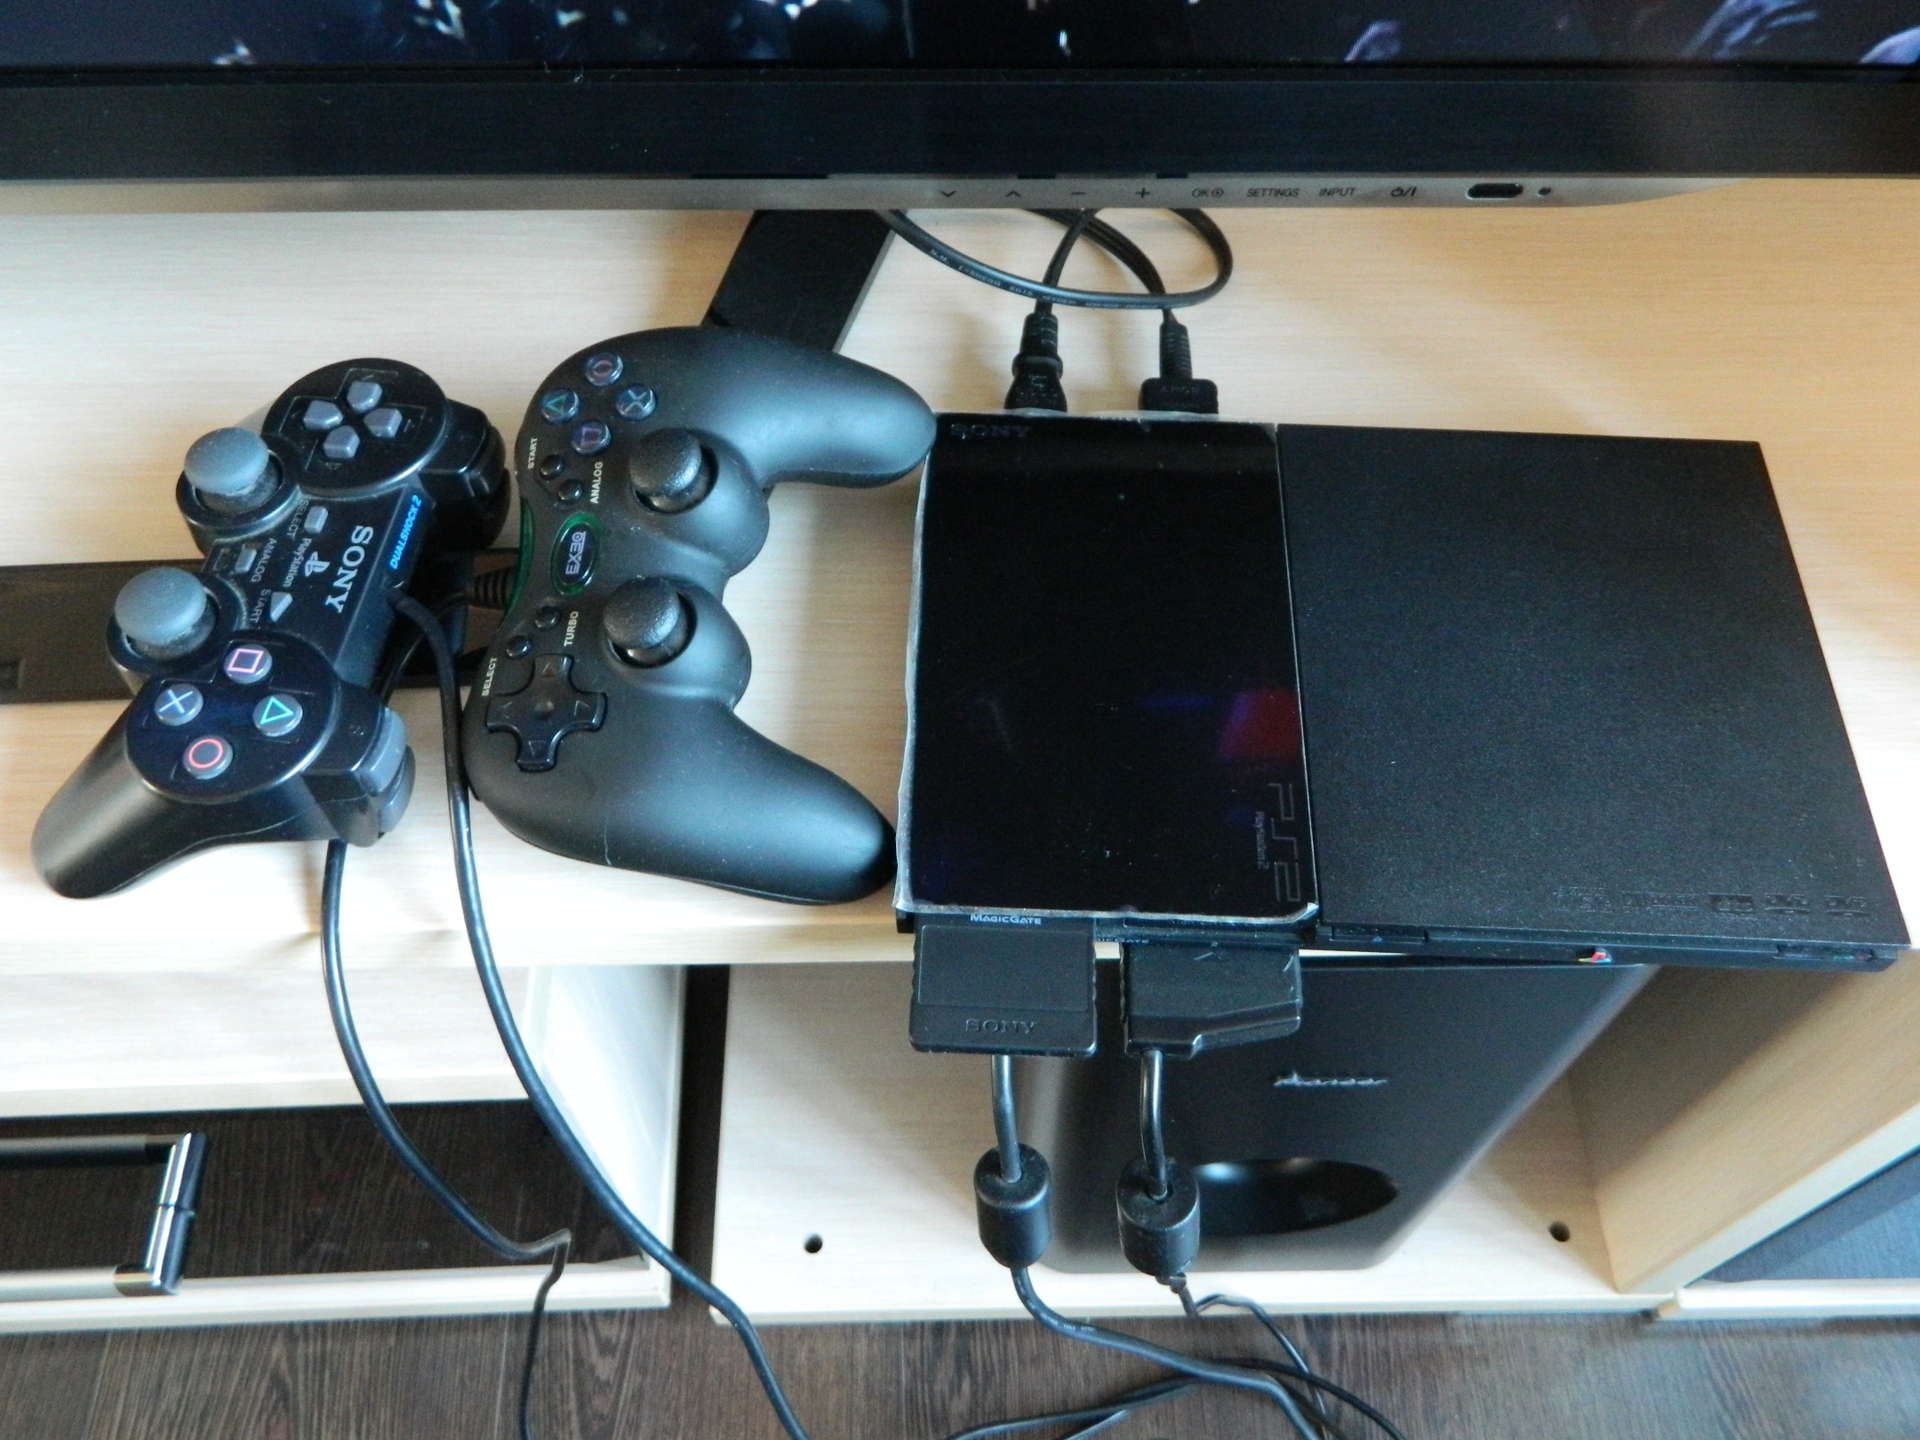 Ps2 playstation. Sony ps2 SCPH-90008. Ps2 Slim 90008. Sony PLAYSTATION 2 Slim SCPH-90008. Sony ps2 Slim.